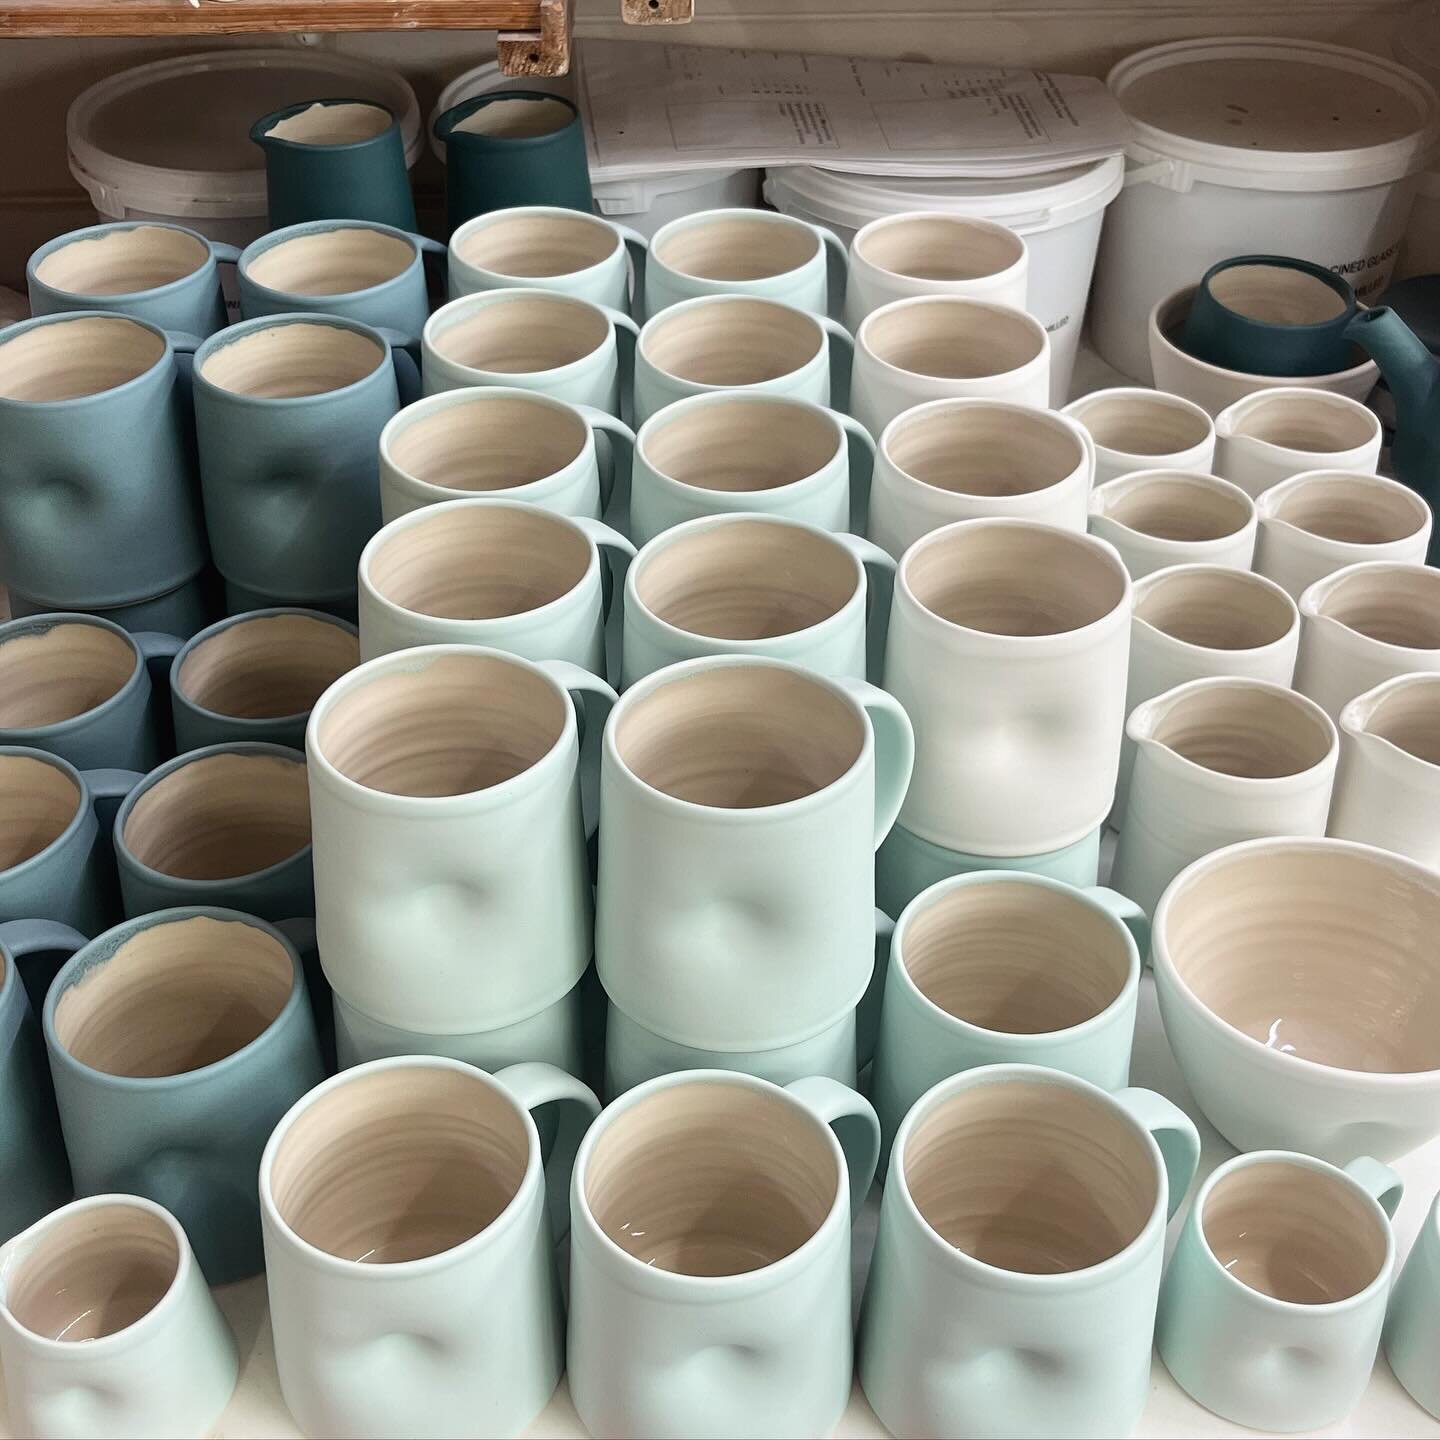 Great firing. Very few wobbles or spots (not that I don&rsquo;t appreciate a wobble or spot now and again in other contexts) 

#firing #kiln #handmadeceramics #greens #blues #tactiledesign #madetofeel #ergonomic #gift #love #mug #perfectgift #contemp